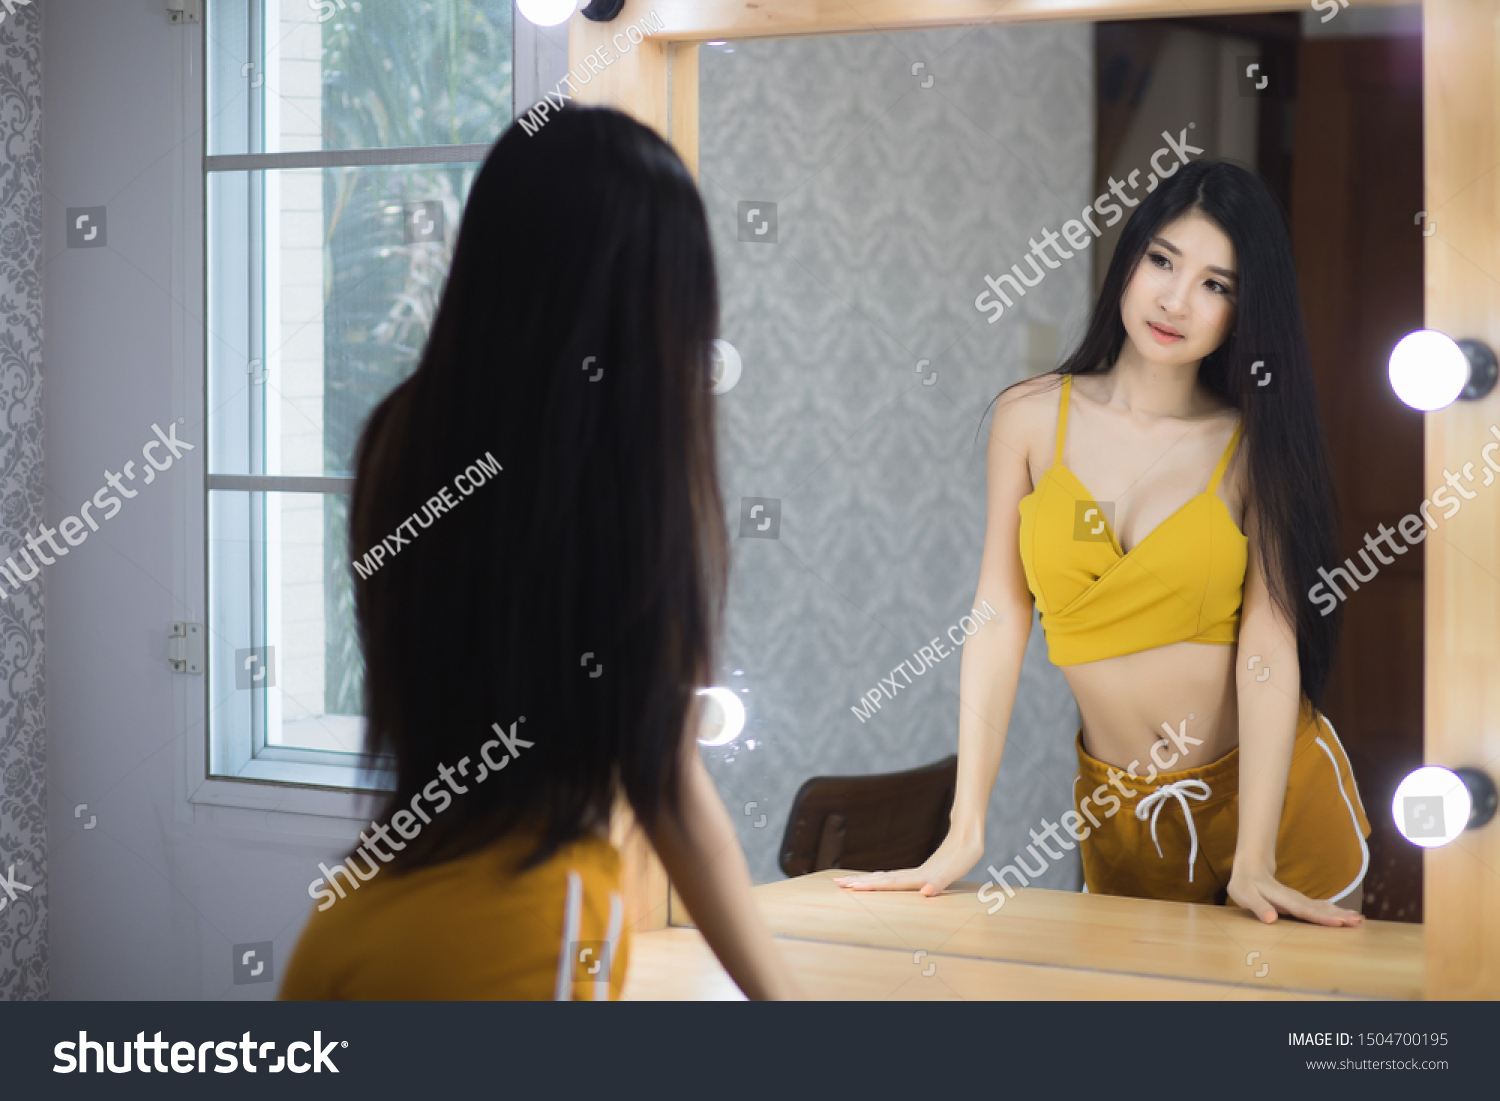 Peeping at  asian women in changing room